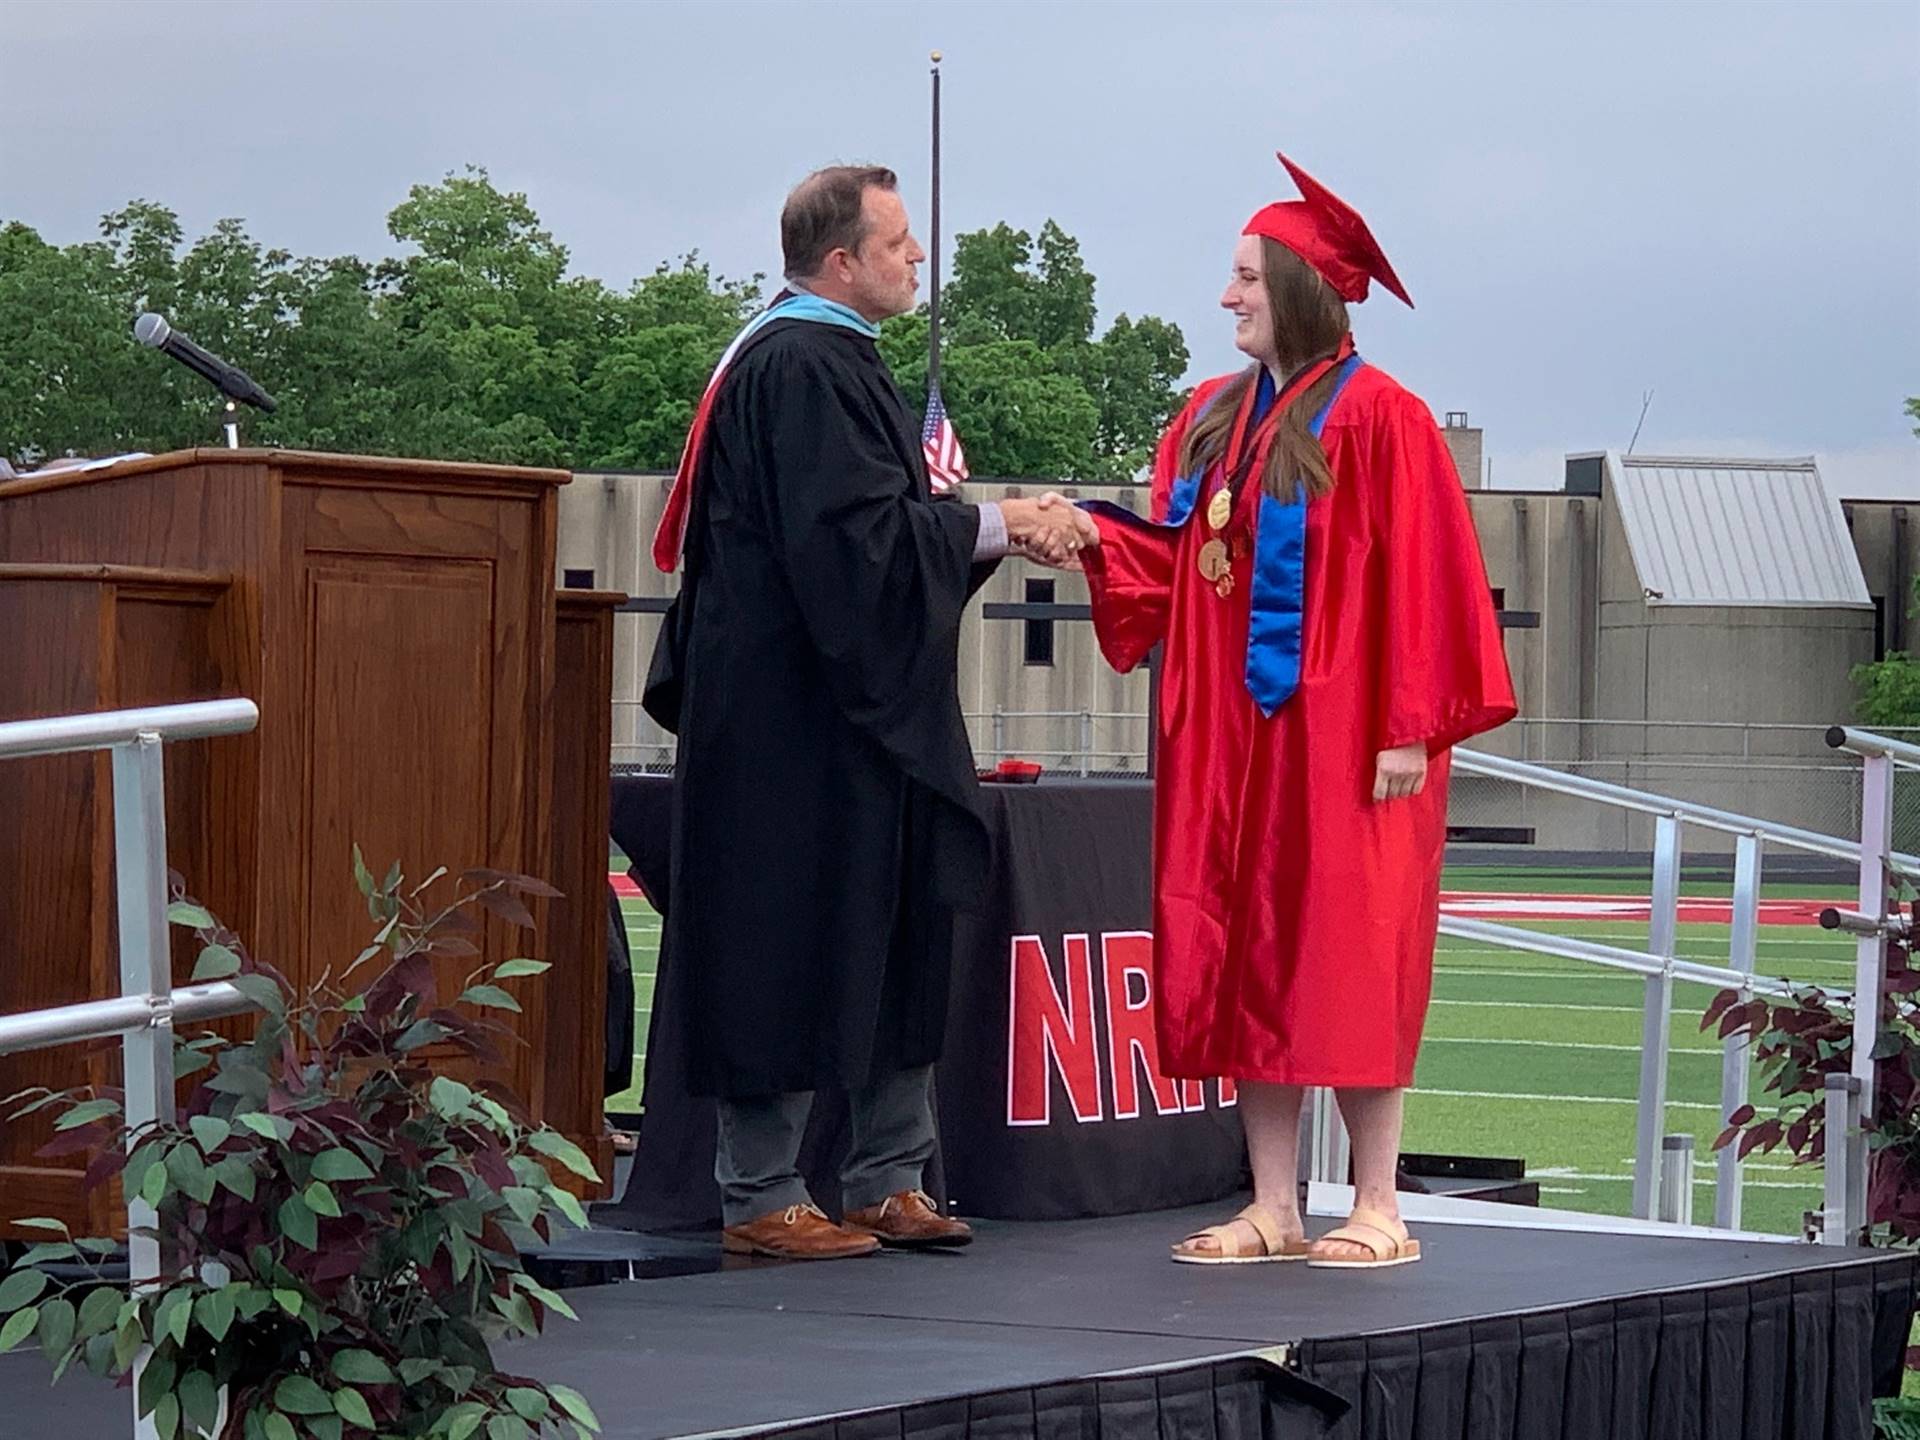 valedictorian being recognized at graduation